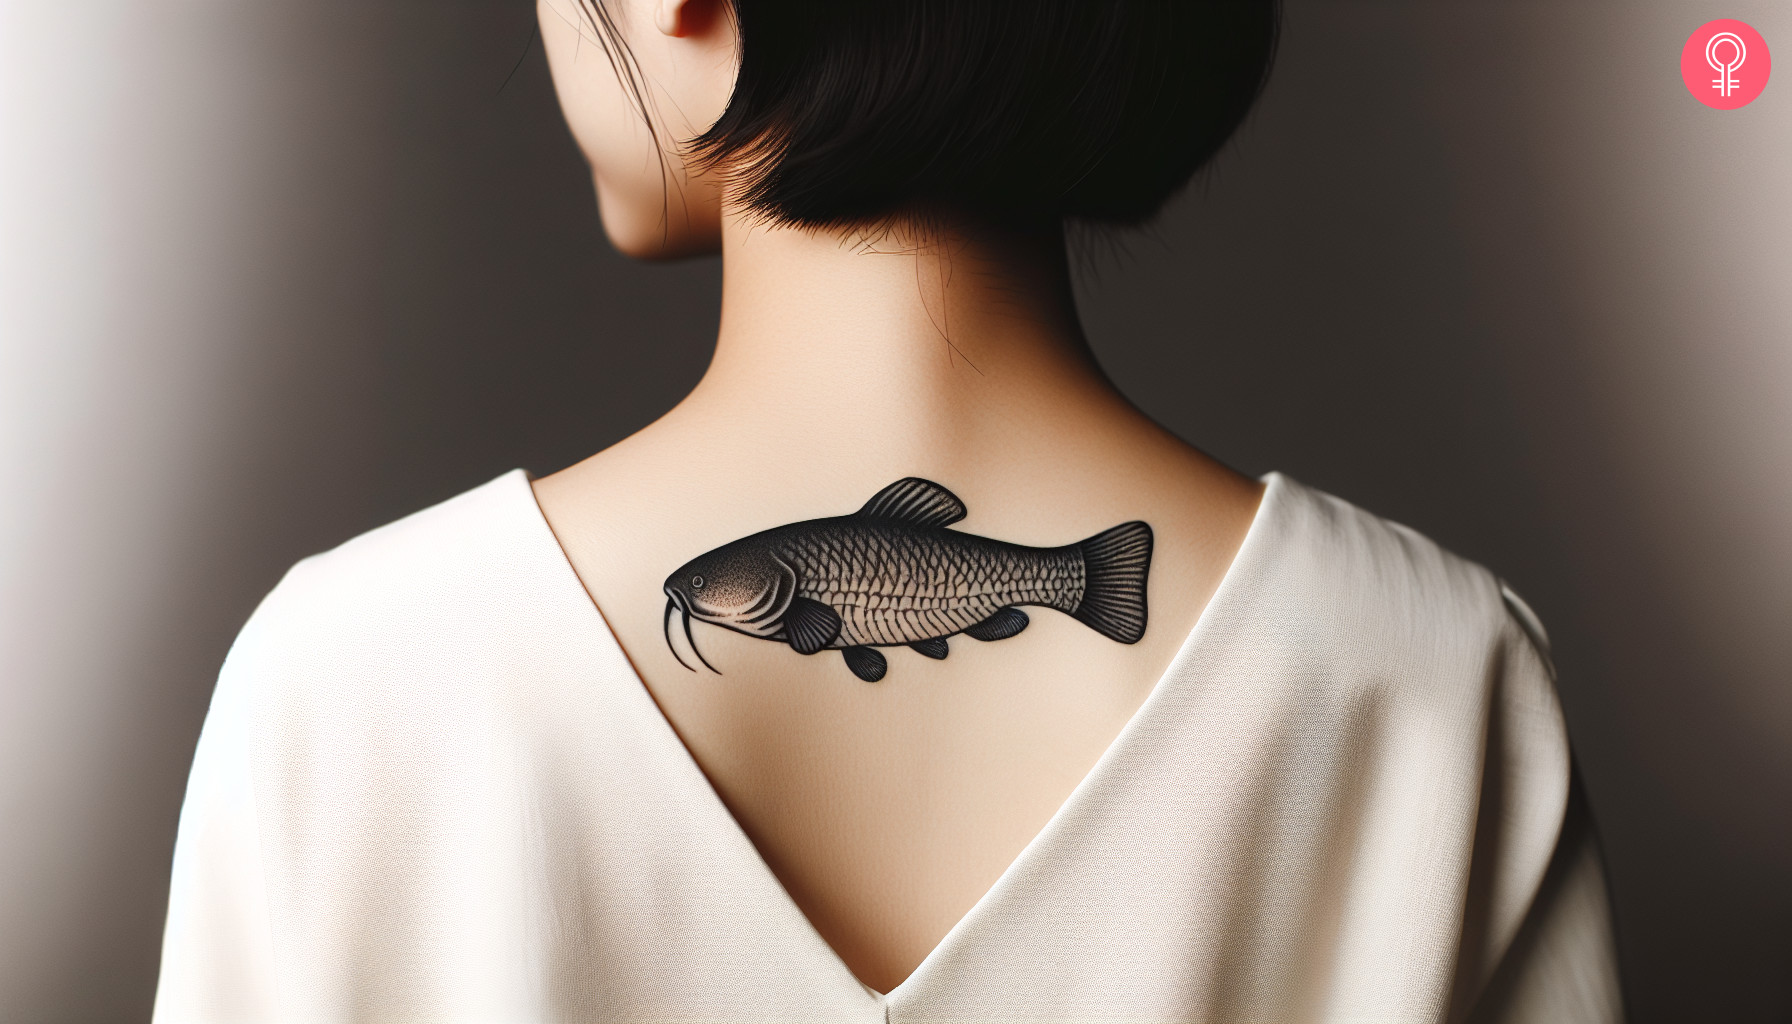 Woman with a flathead catfish tattoo on her upper back